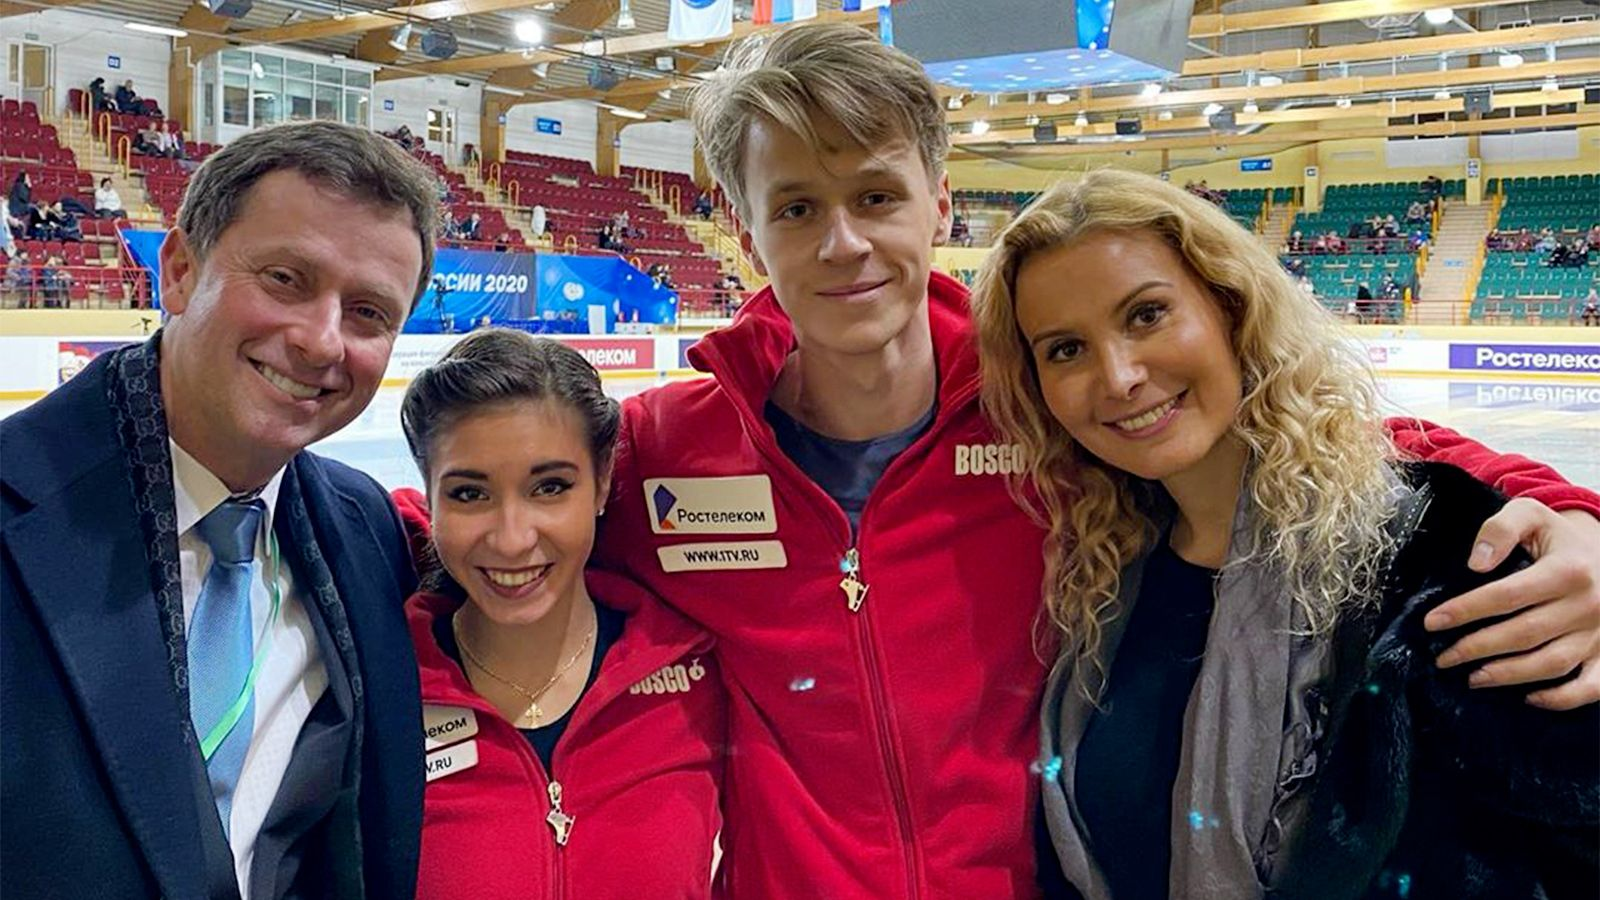 Diana Davis and Gleb Smolkin, centre, who are not coached by Eteri Tutberidze, right, finished second at the Russian Championships in 2021-2022 ©FKKR